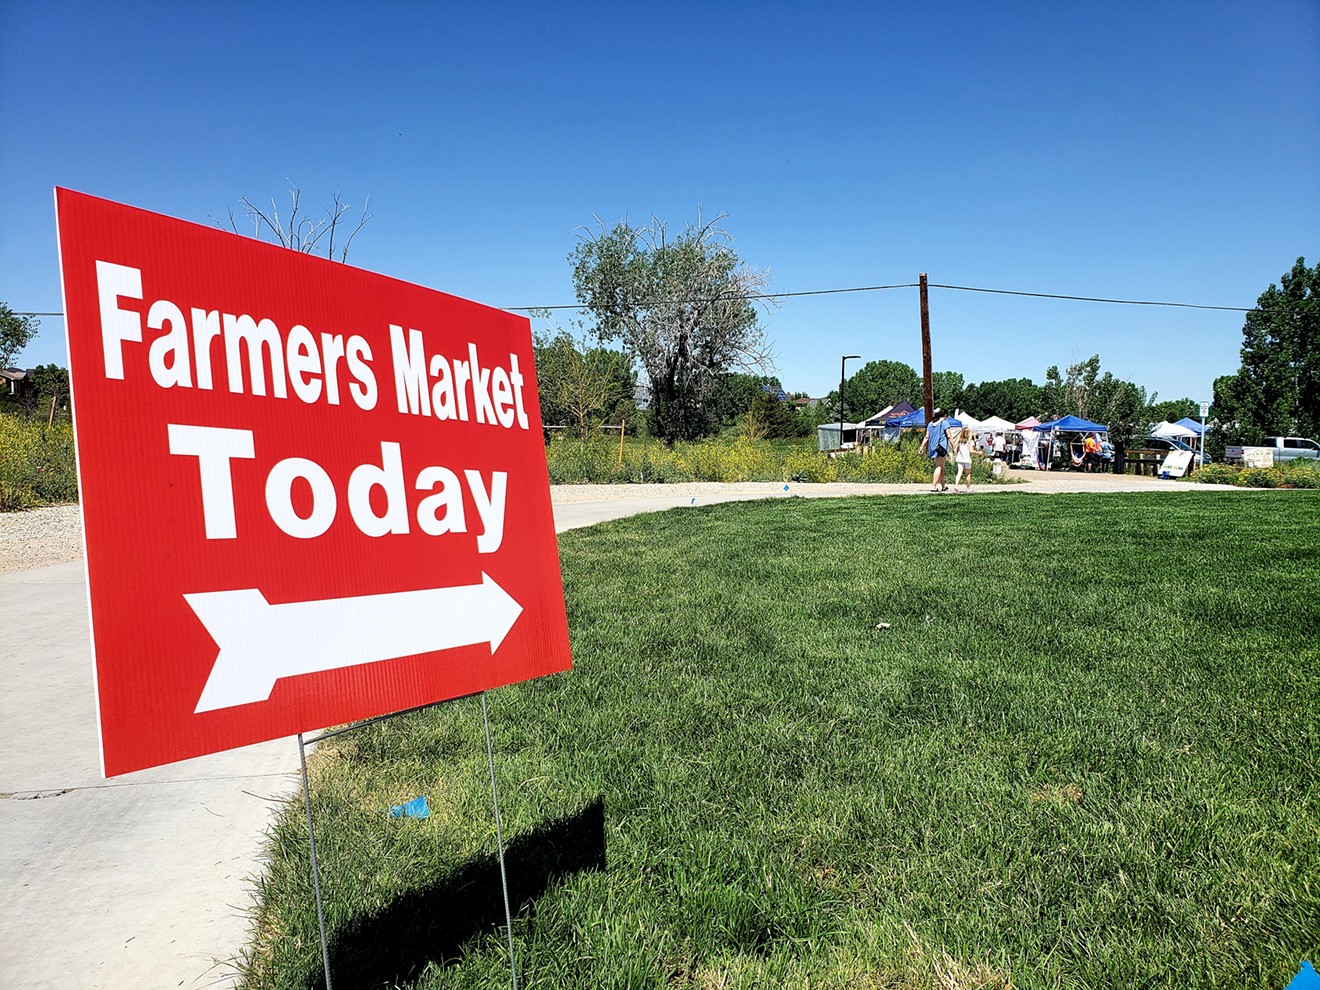 The Stanley Marketplace Farmers' Market opened on Friday, June 1.